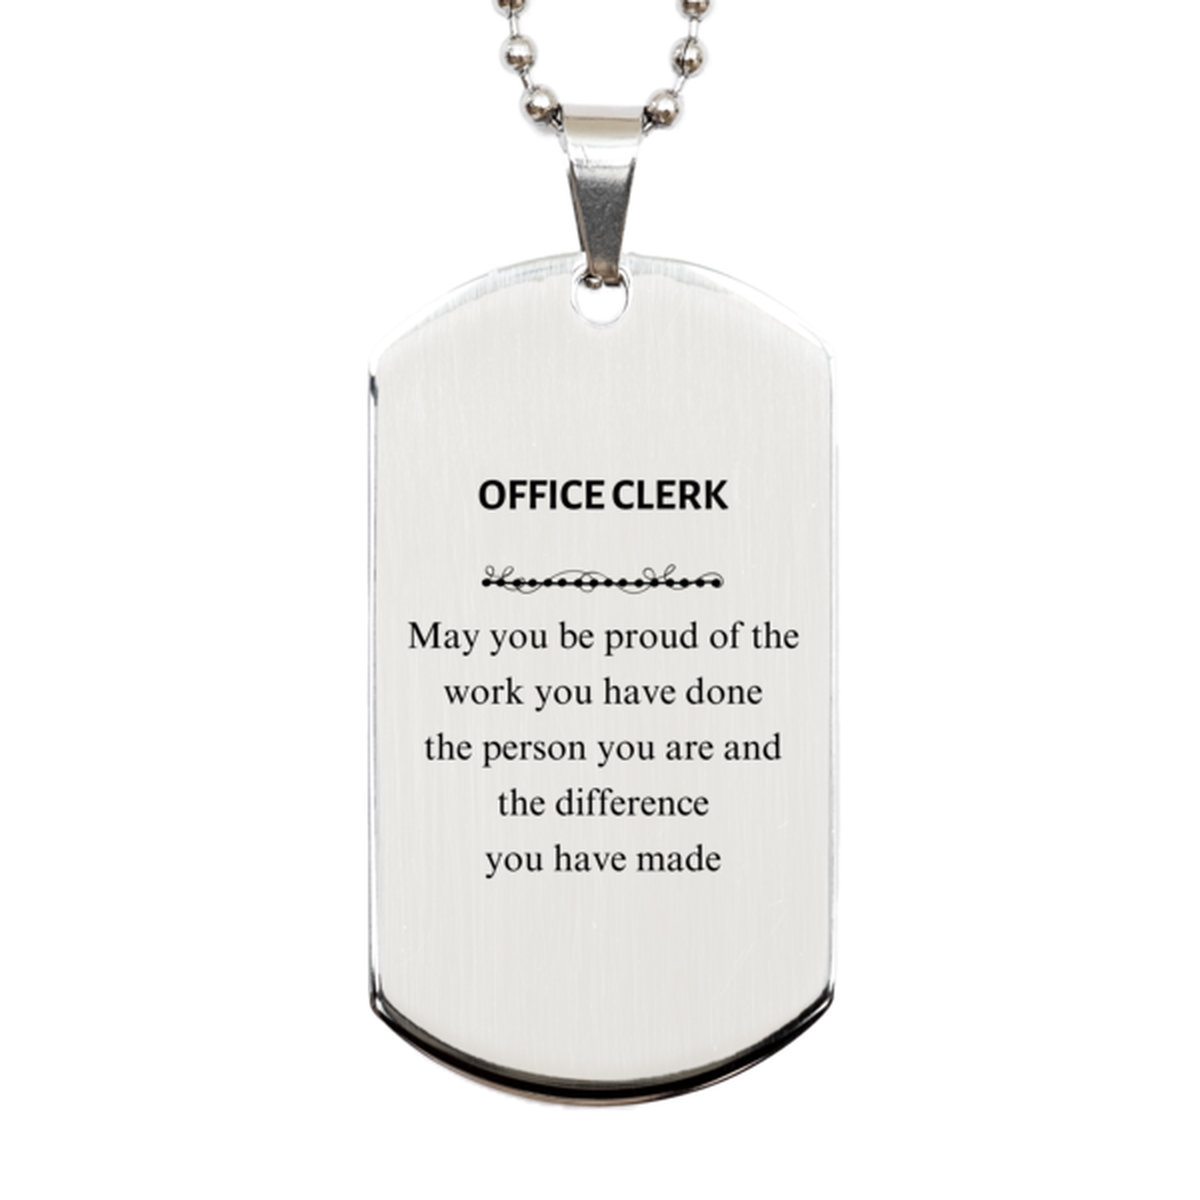 Office Clerk May you be proud of the work you have done, Retirement Office Clerk Silver Dog Tag for Colleague Appreciation Gifts Amazing for Office Clerk